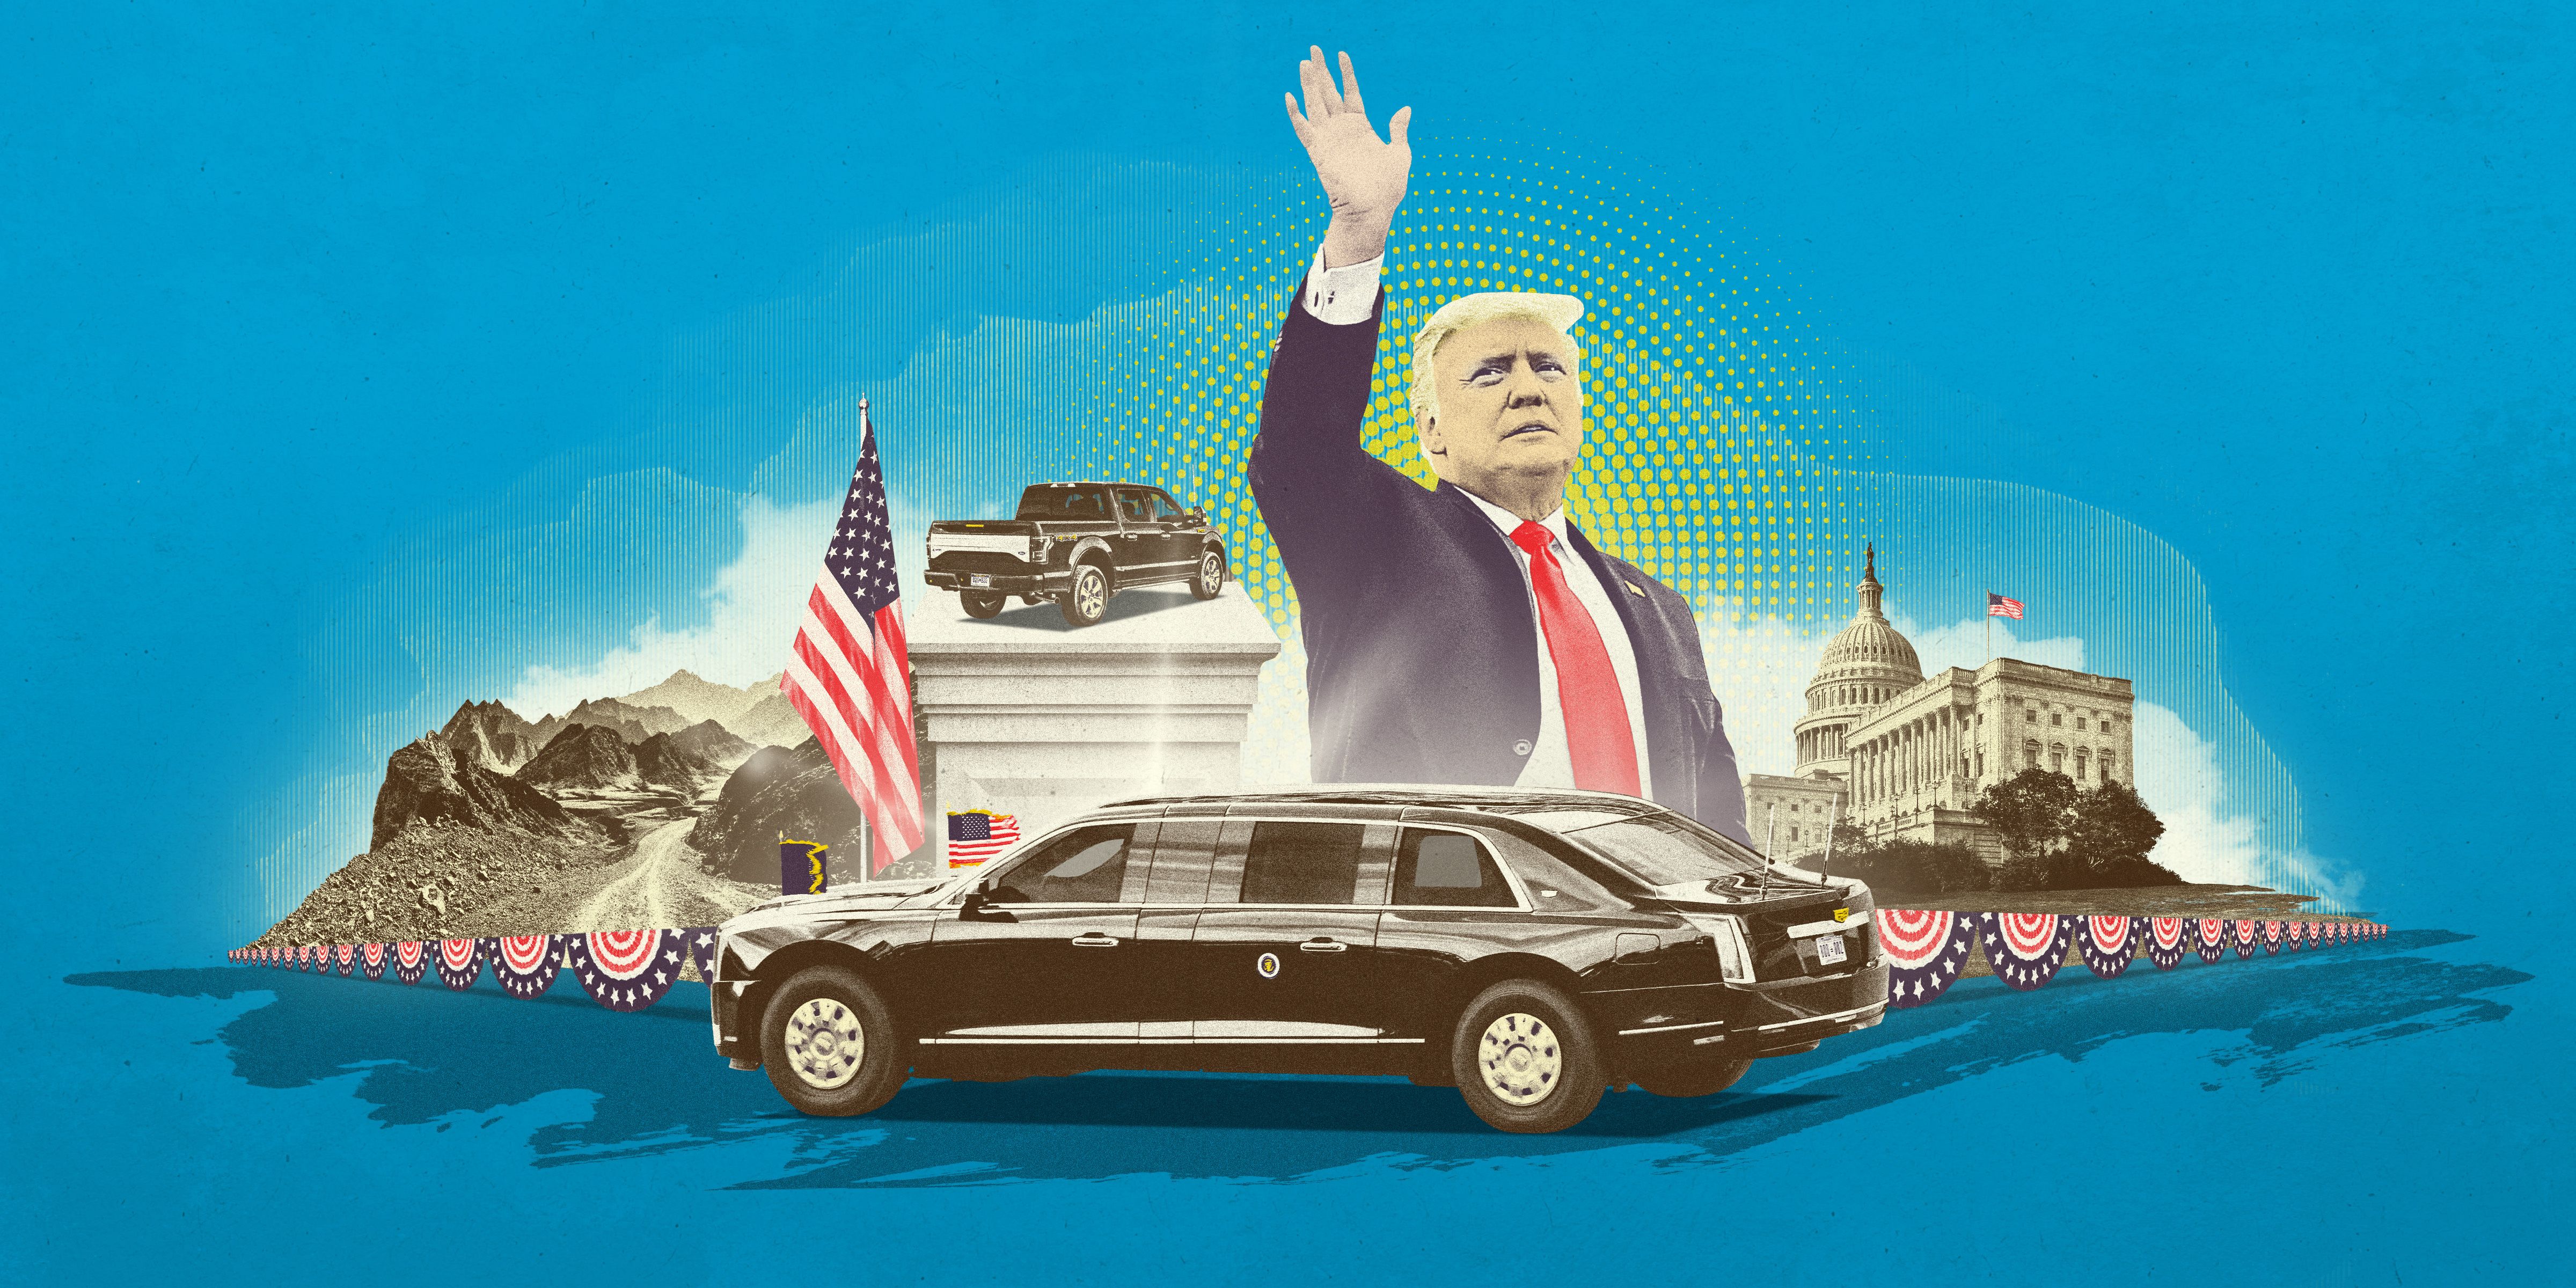 Presidential Limos of the World vs photo